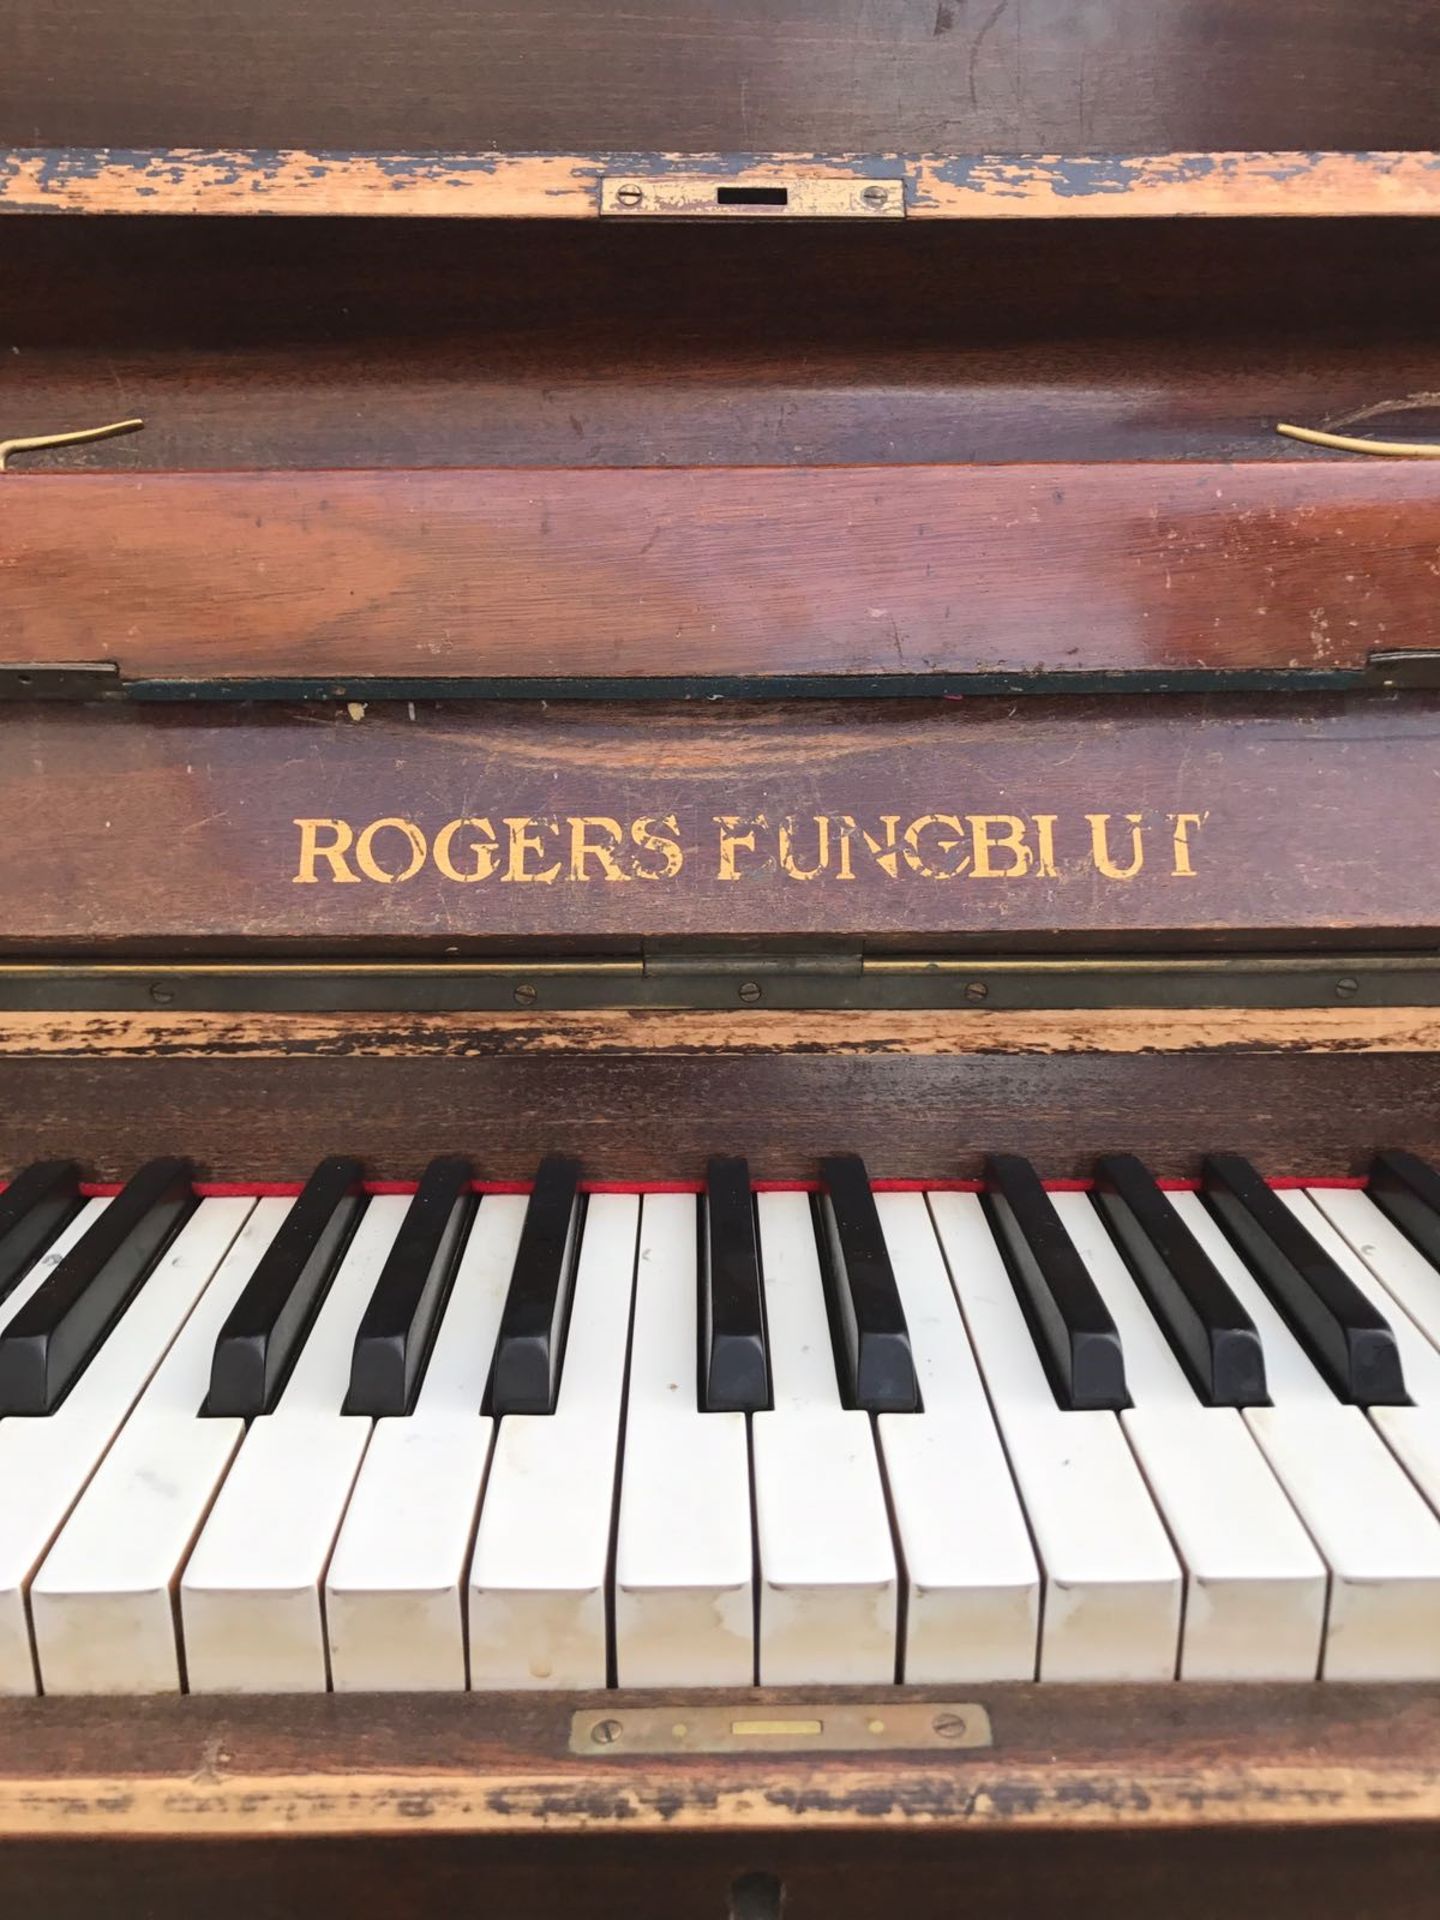 Rogers Eungblut Piano - Image 2 of 3